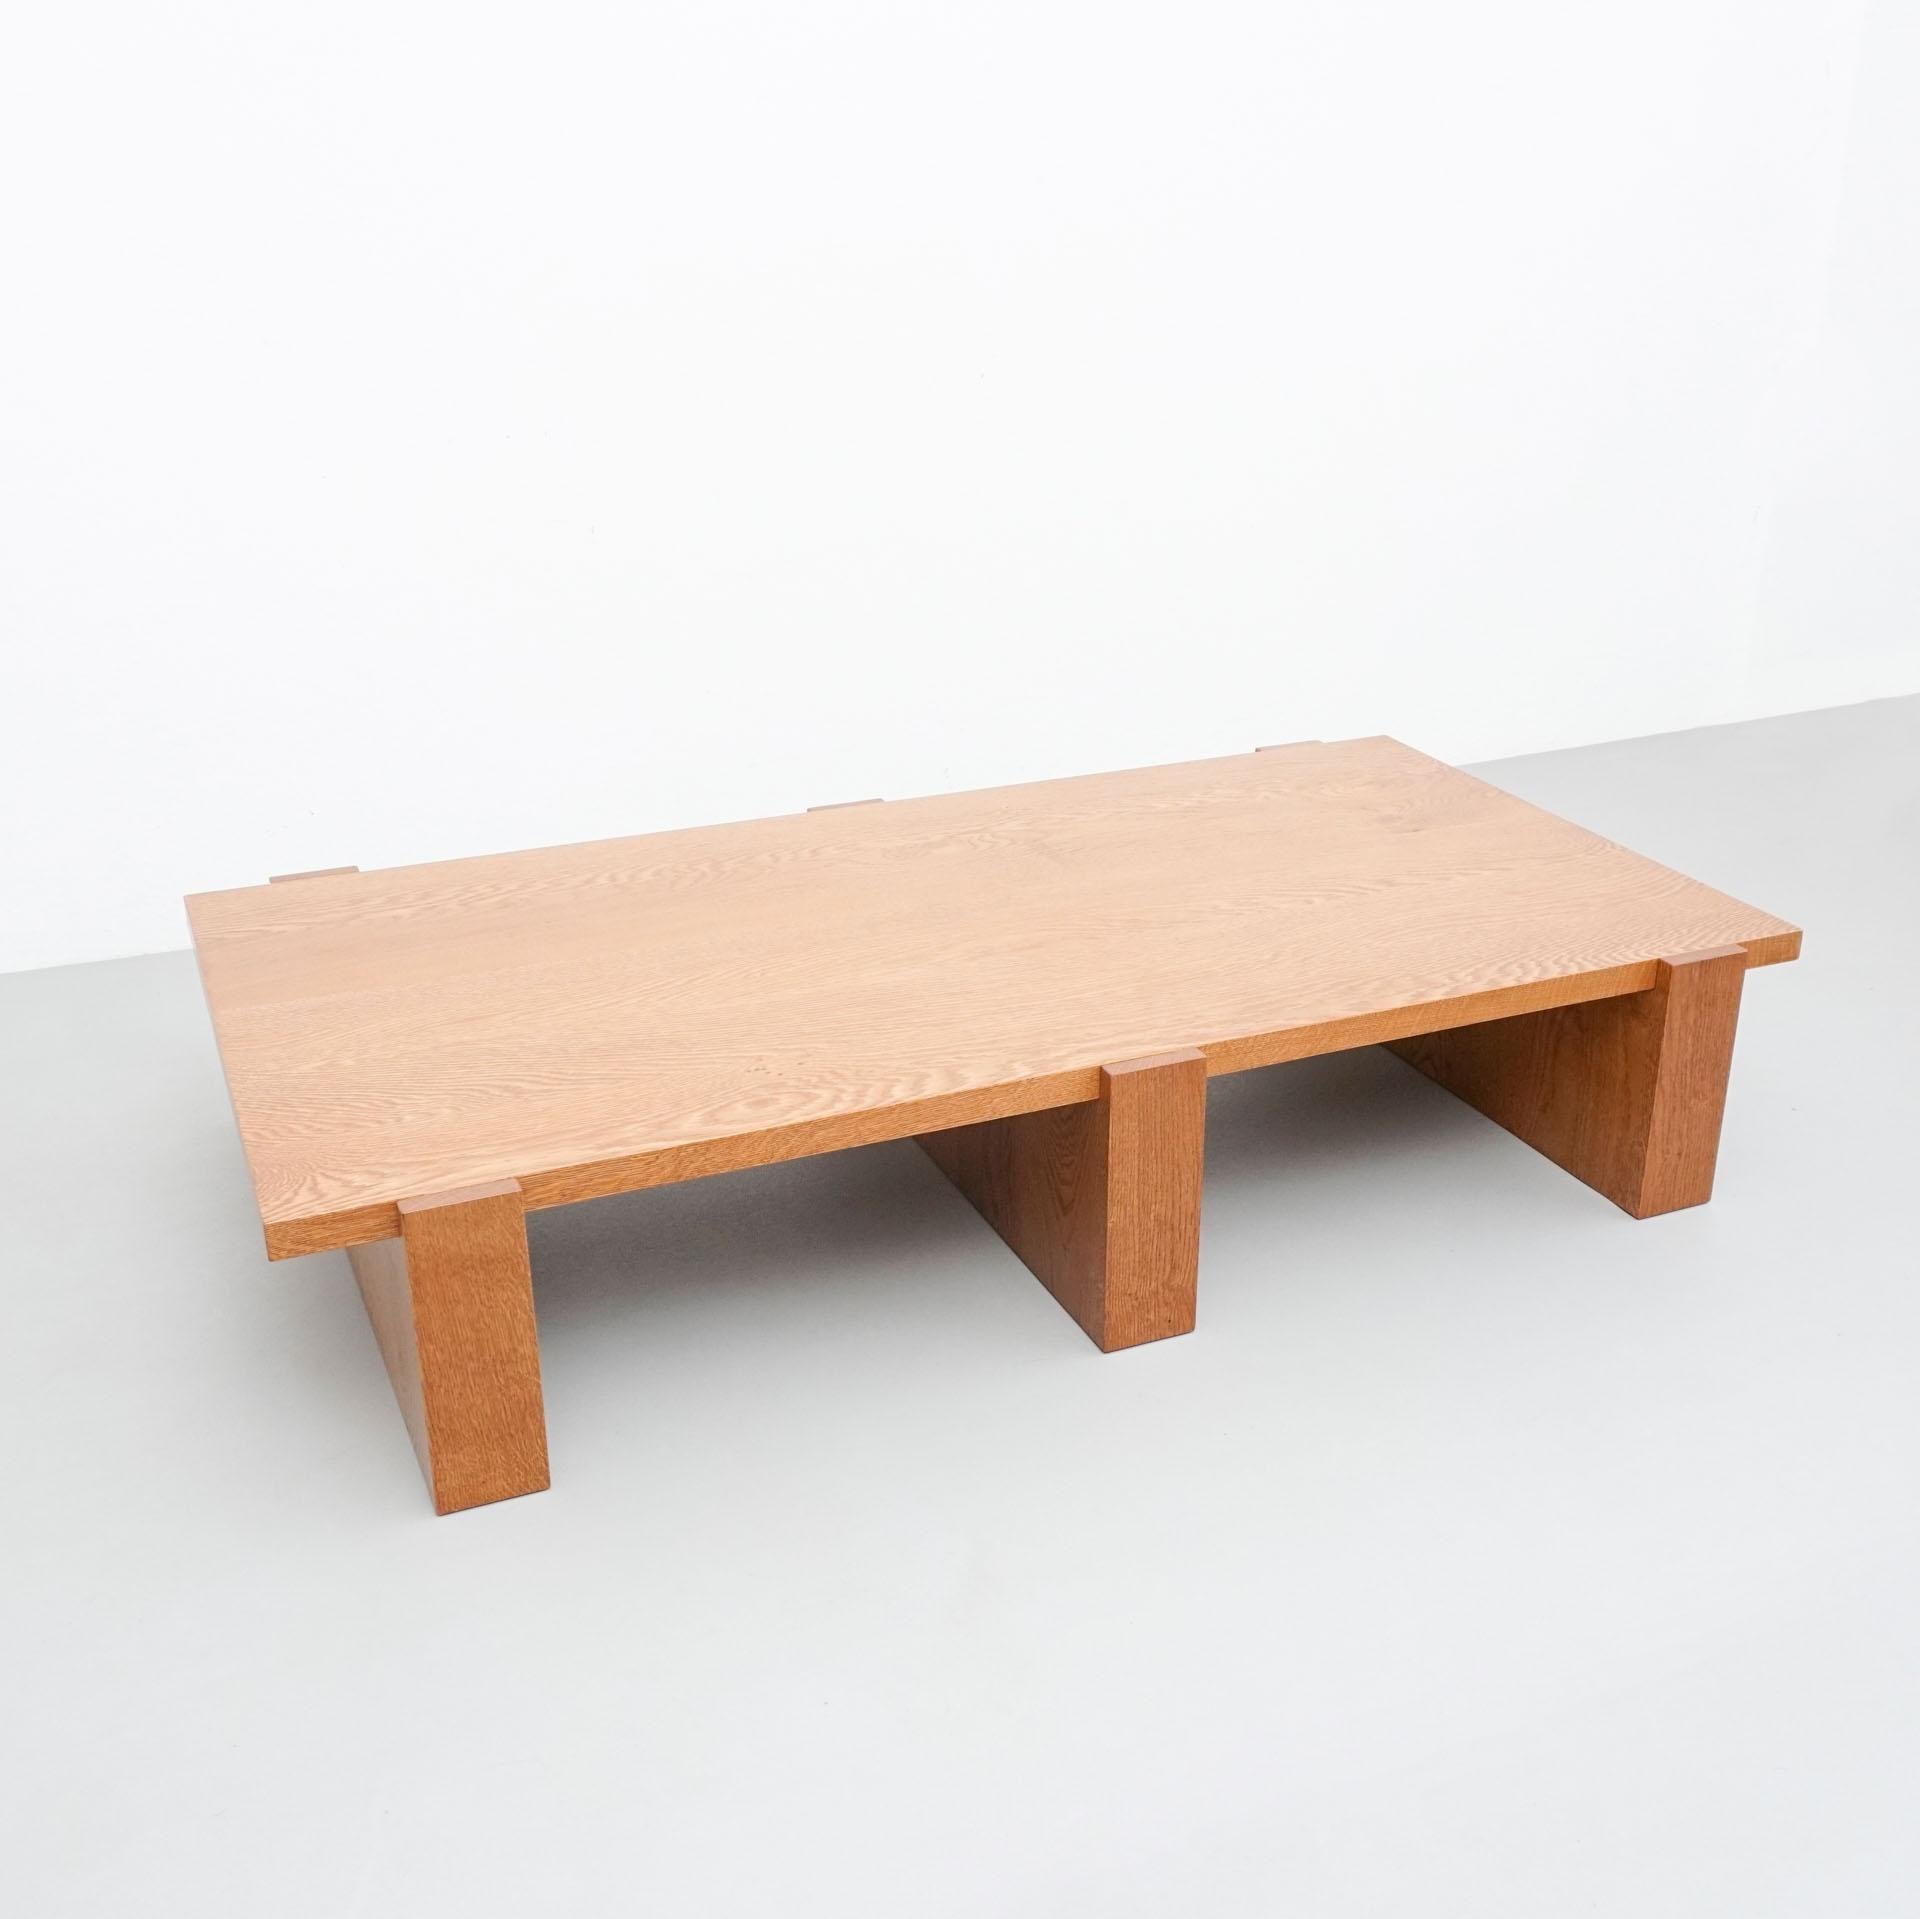 Spanish Dada Est. Contemporary Solid Oak Low Table For Sale